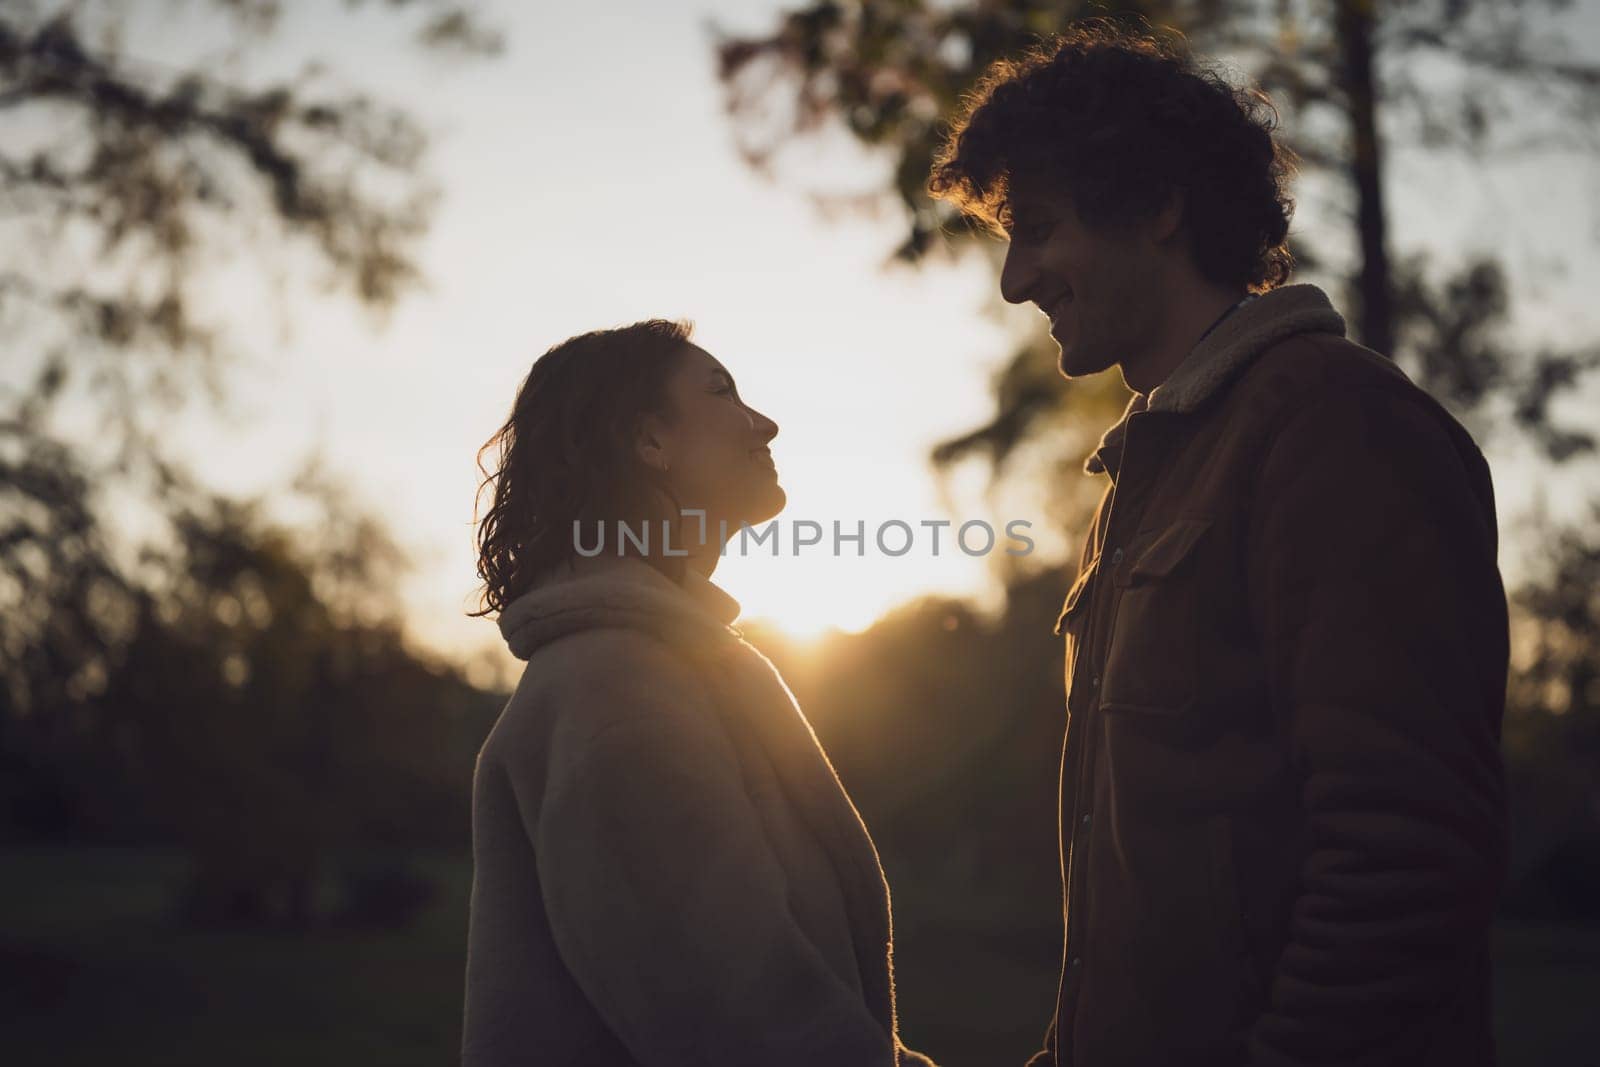 Portrait of happy loving couple in park in sunset. Couple in silhouette looking at each other.